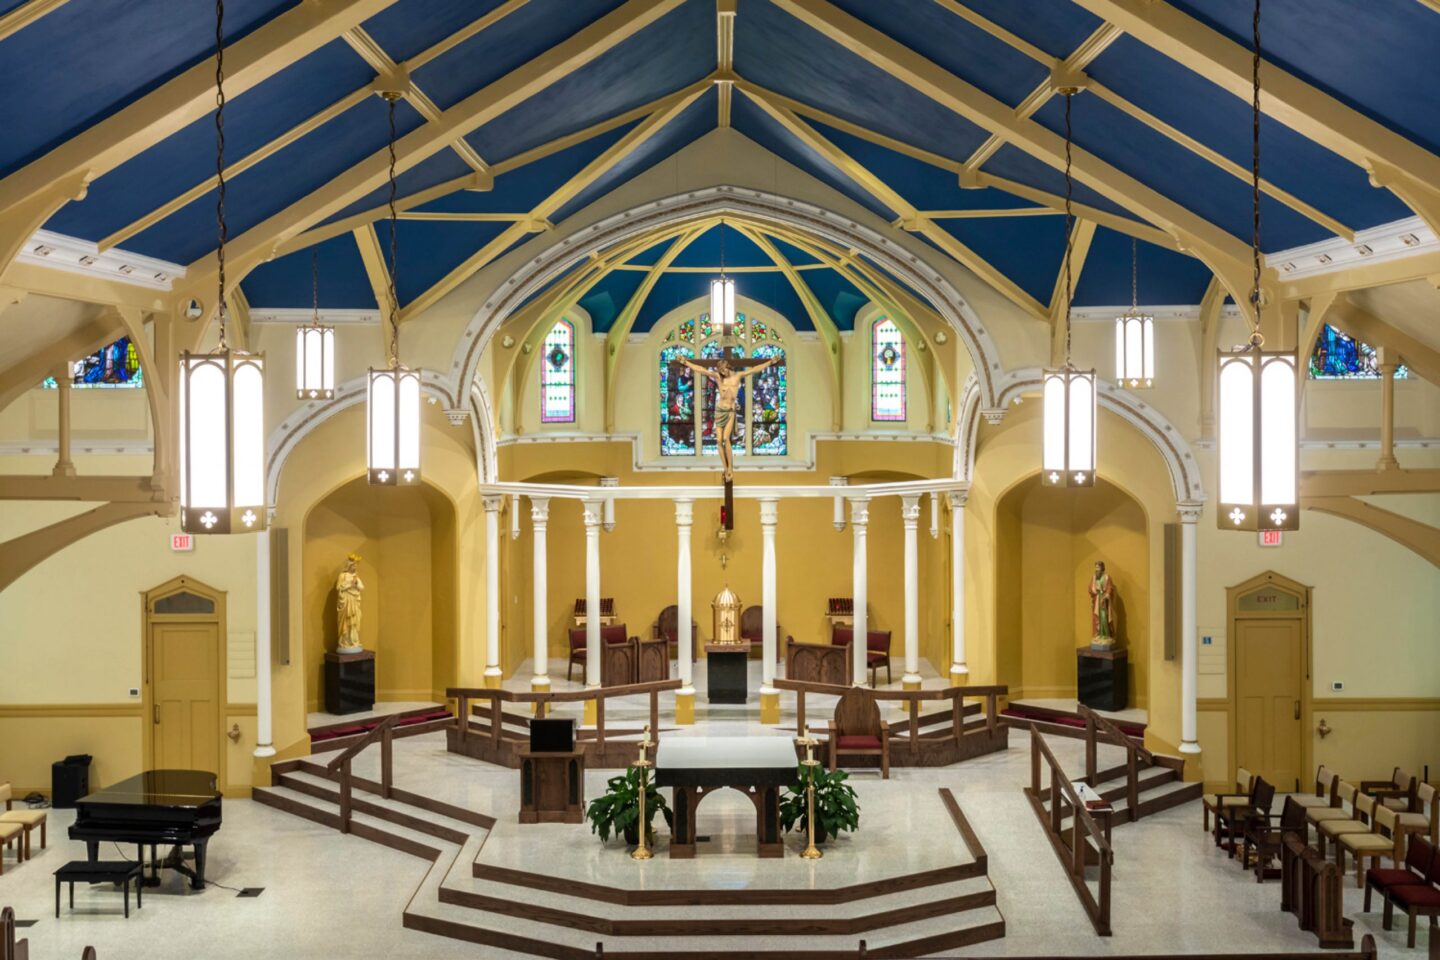 View from Choir Loft of St. Paul the Apostle Catholic Church Altar designed by Bray Architects